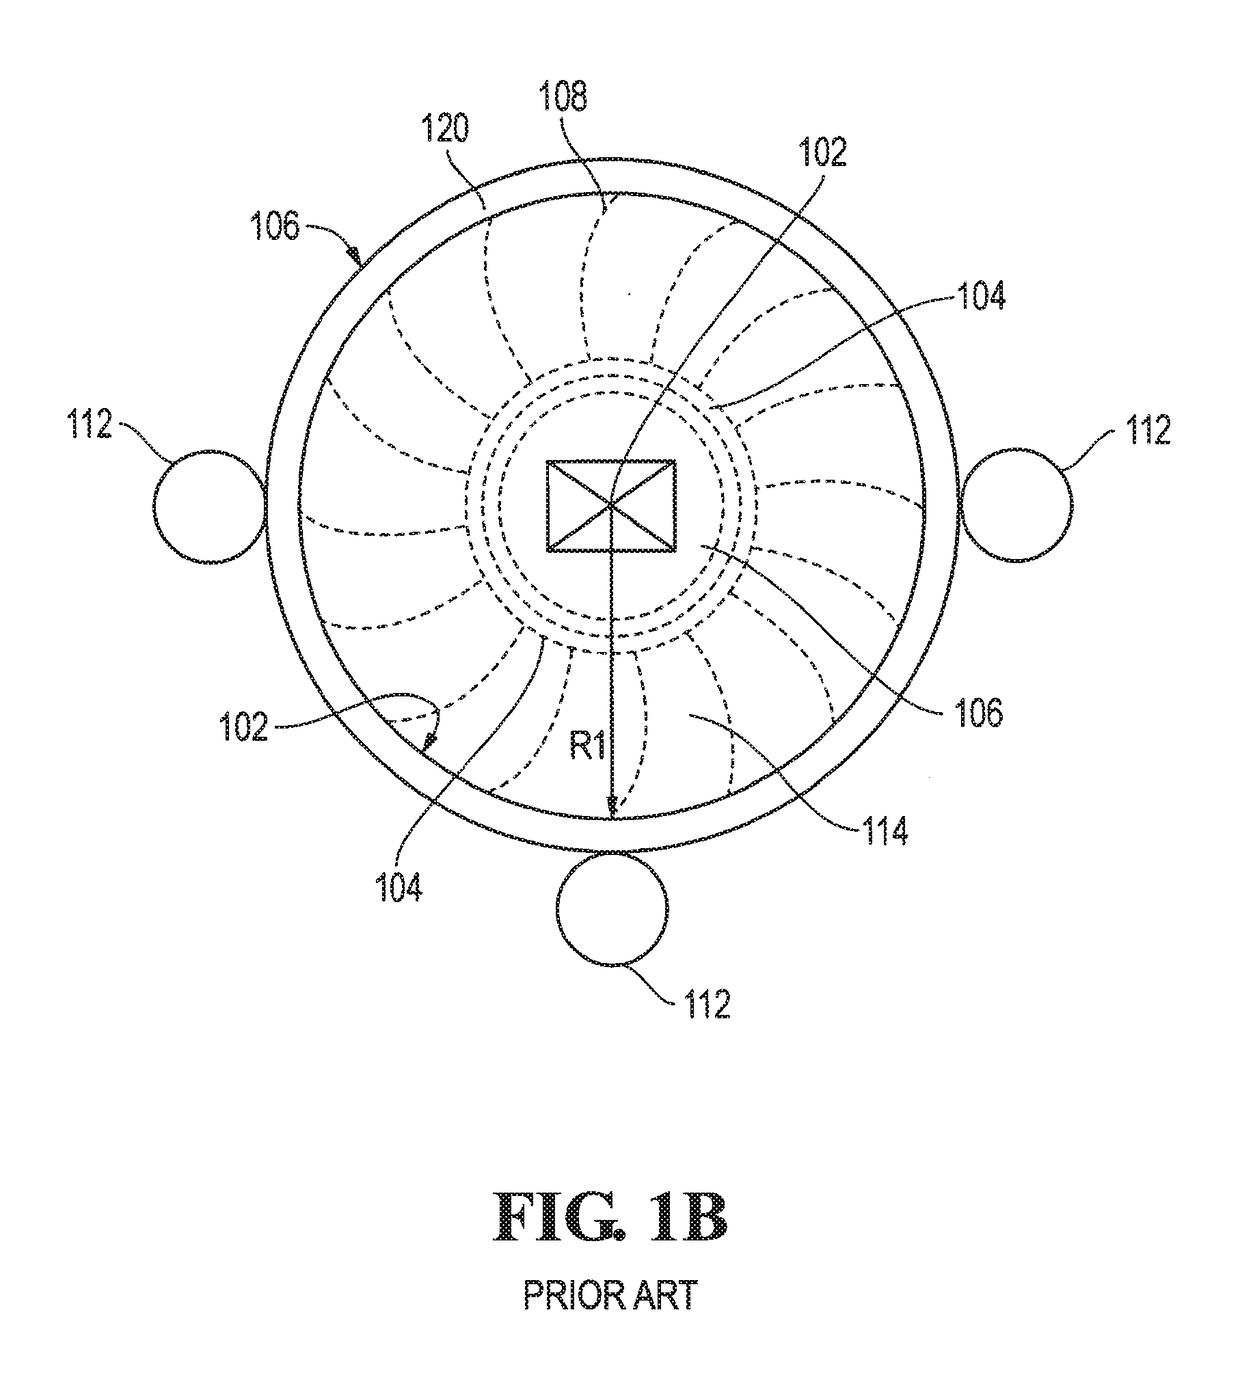 Magnet configurations for magnetic levitation of wind turbines and other apparatus